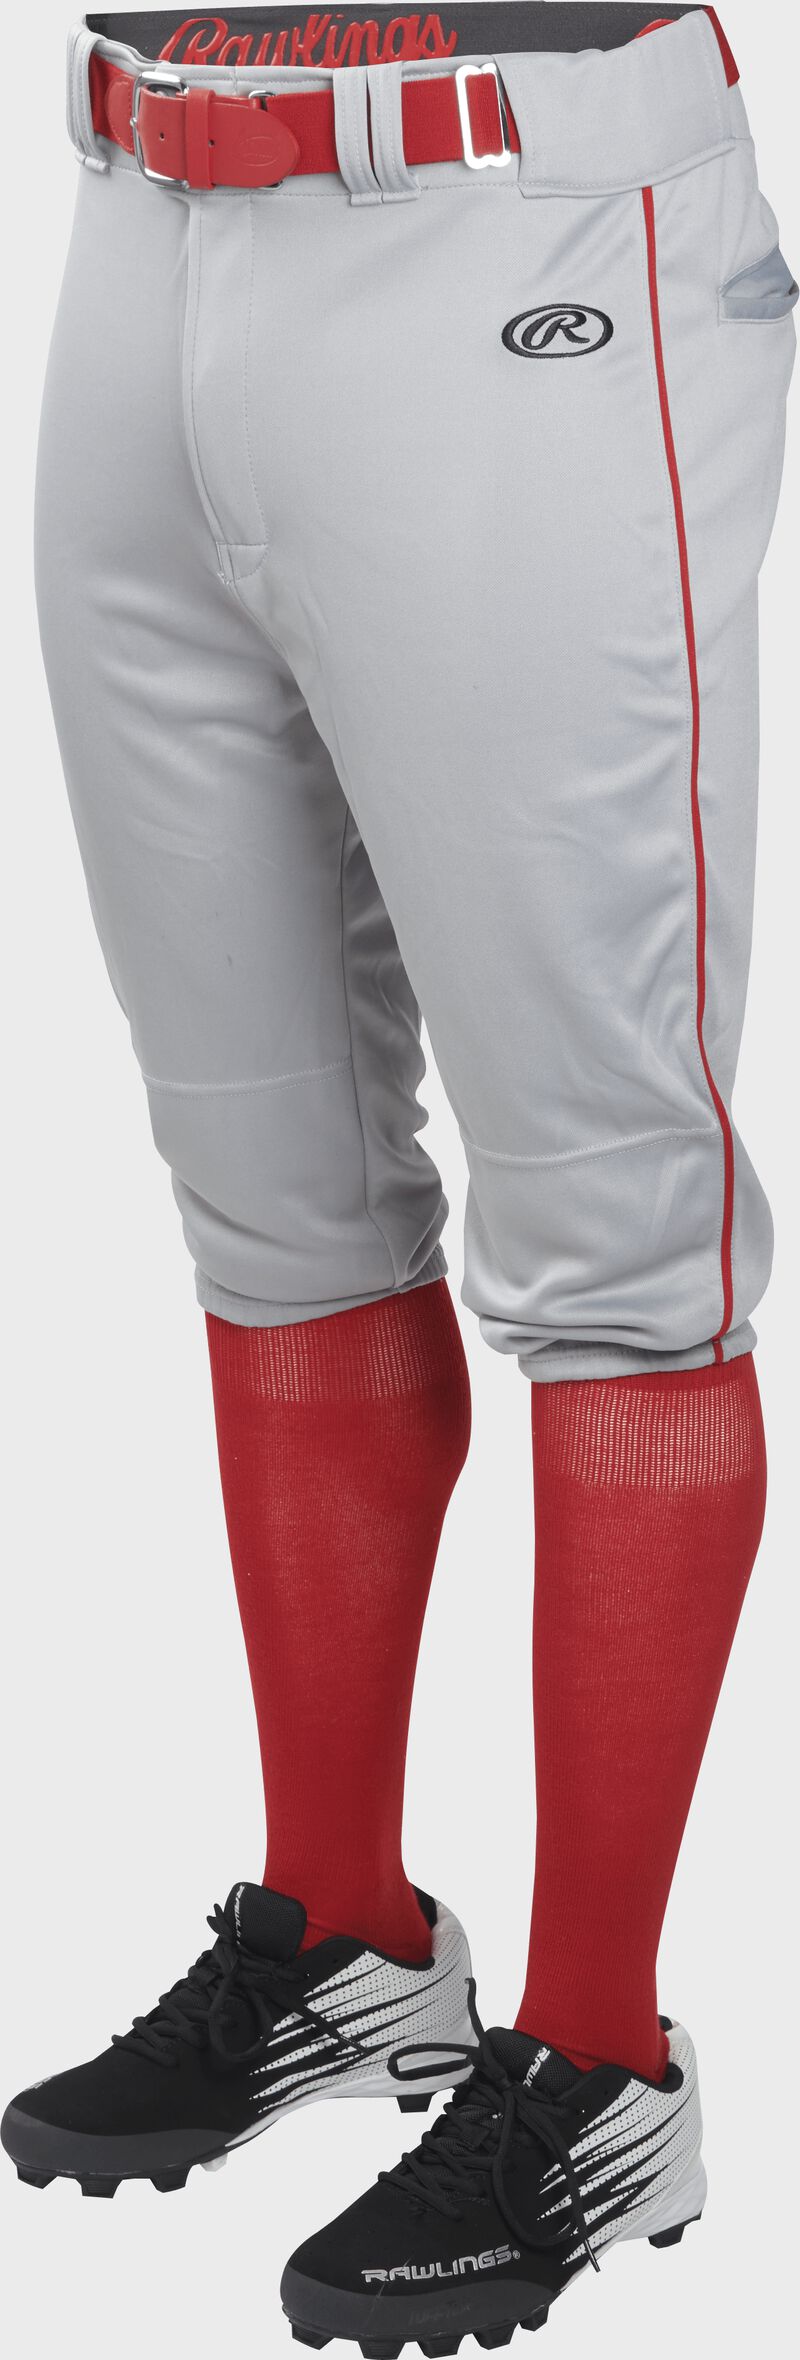 Launch Piped Knicker Baseball Pants, Adult & Youth